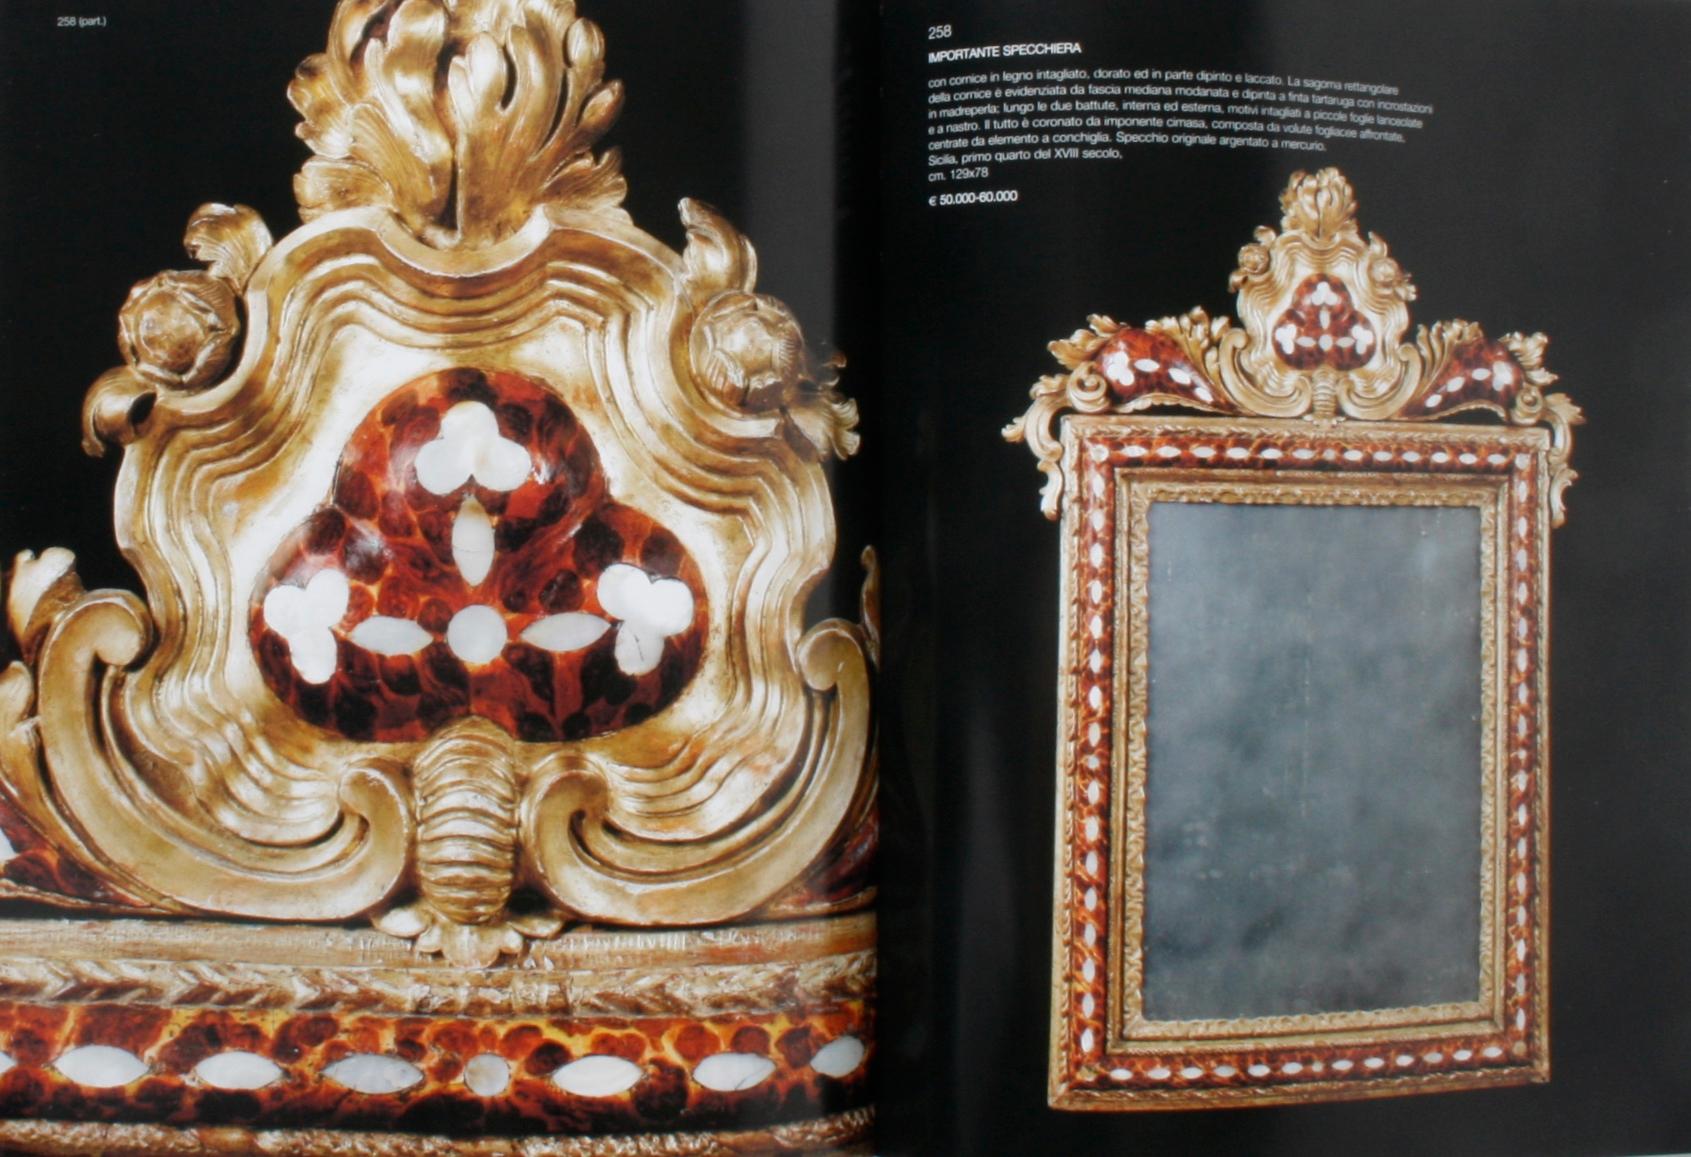 Auction Catalogue of Italian Fine Art, Silver, Ivory, and Venetian Objects, 2006 For Sale 12